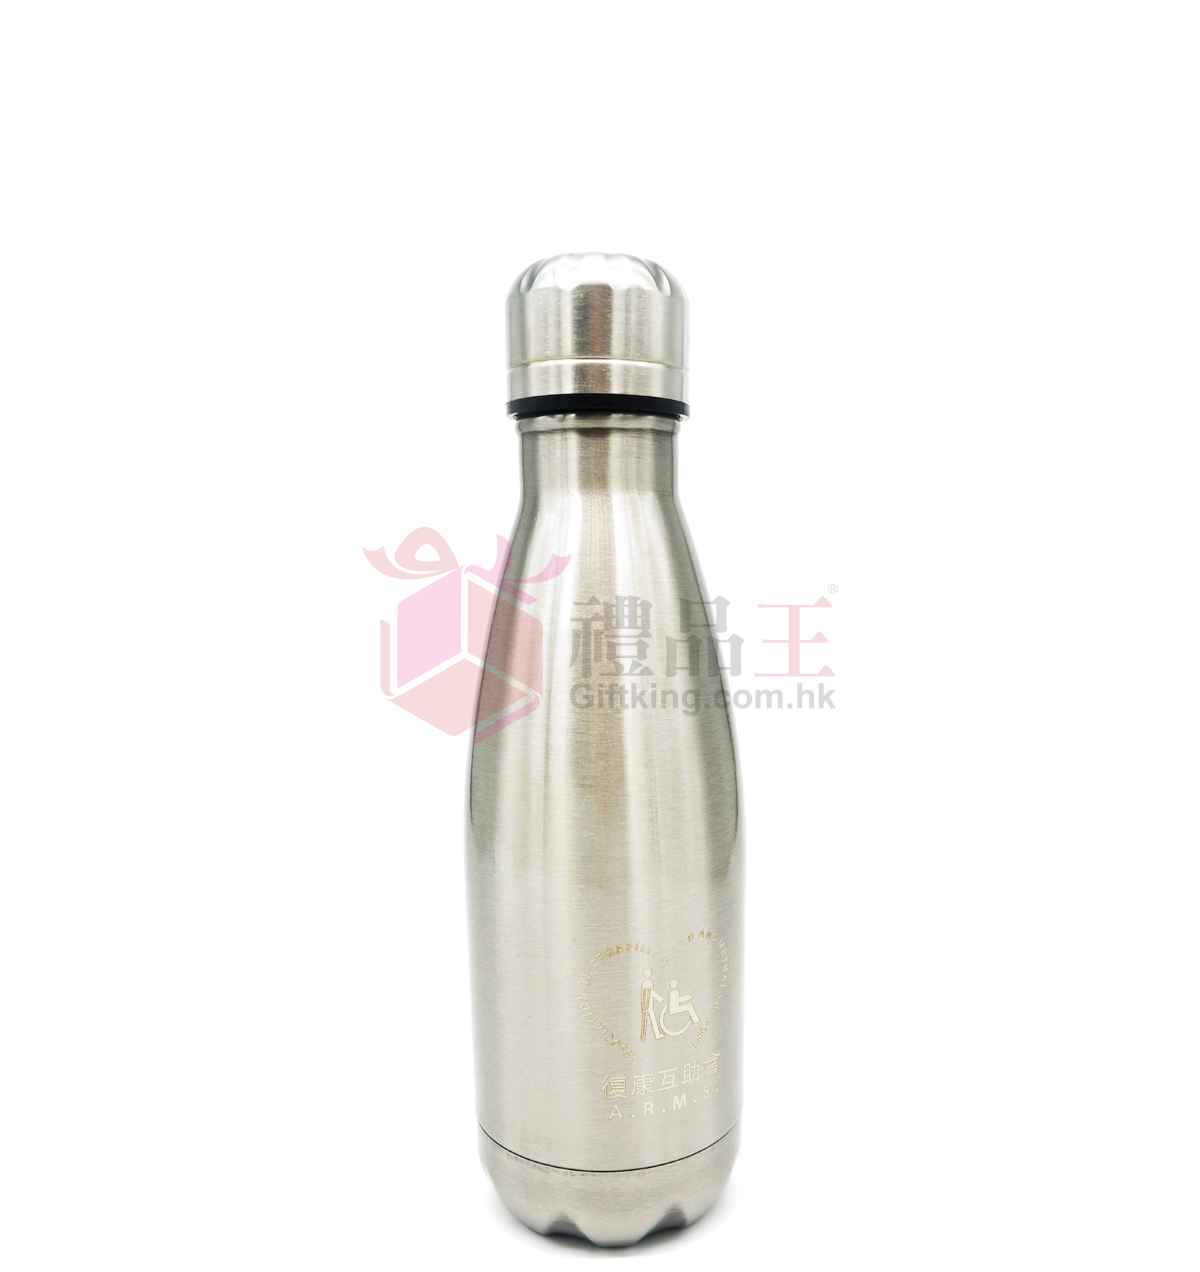 Association of Rehabilitation and Mutual Support stainless steel bottle (Houseware Gifts)